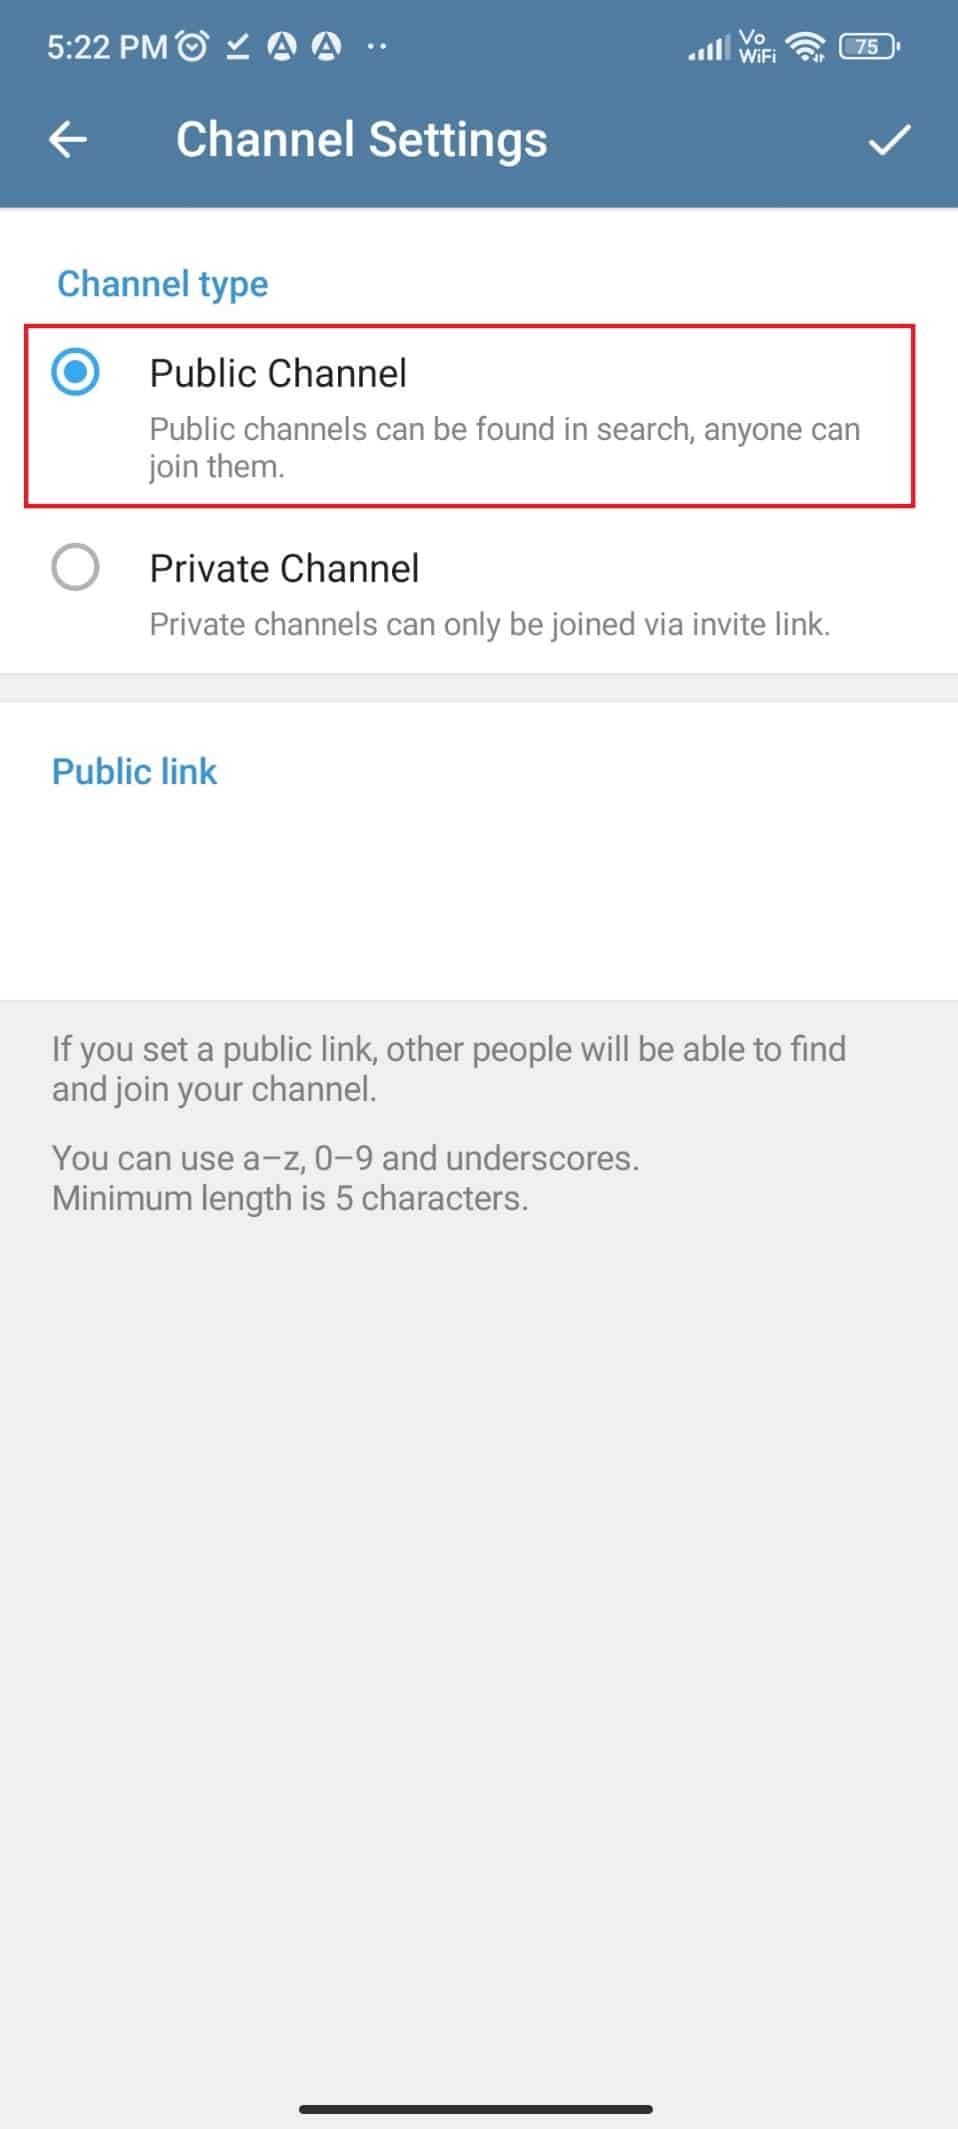 Tap on the Public Channel if you want a public channel 